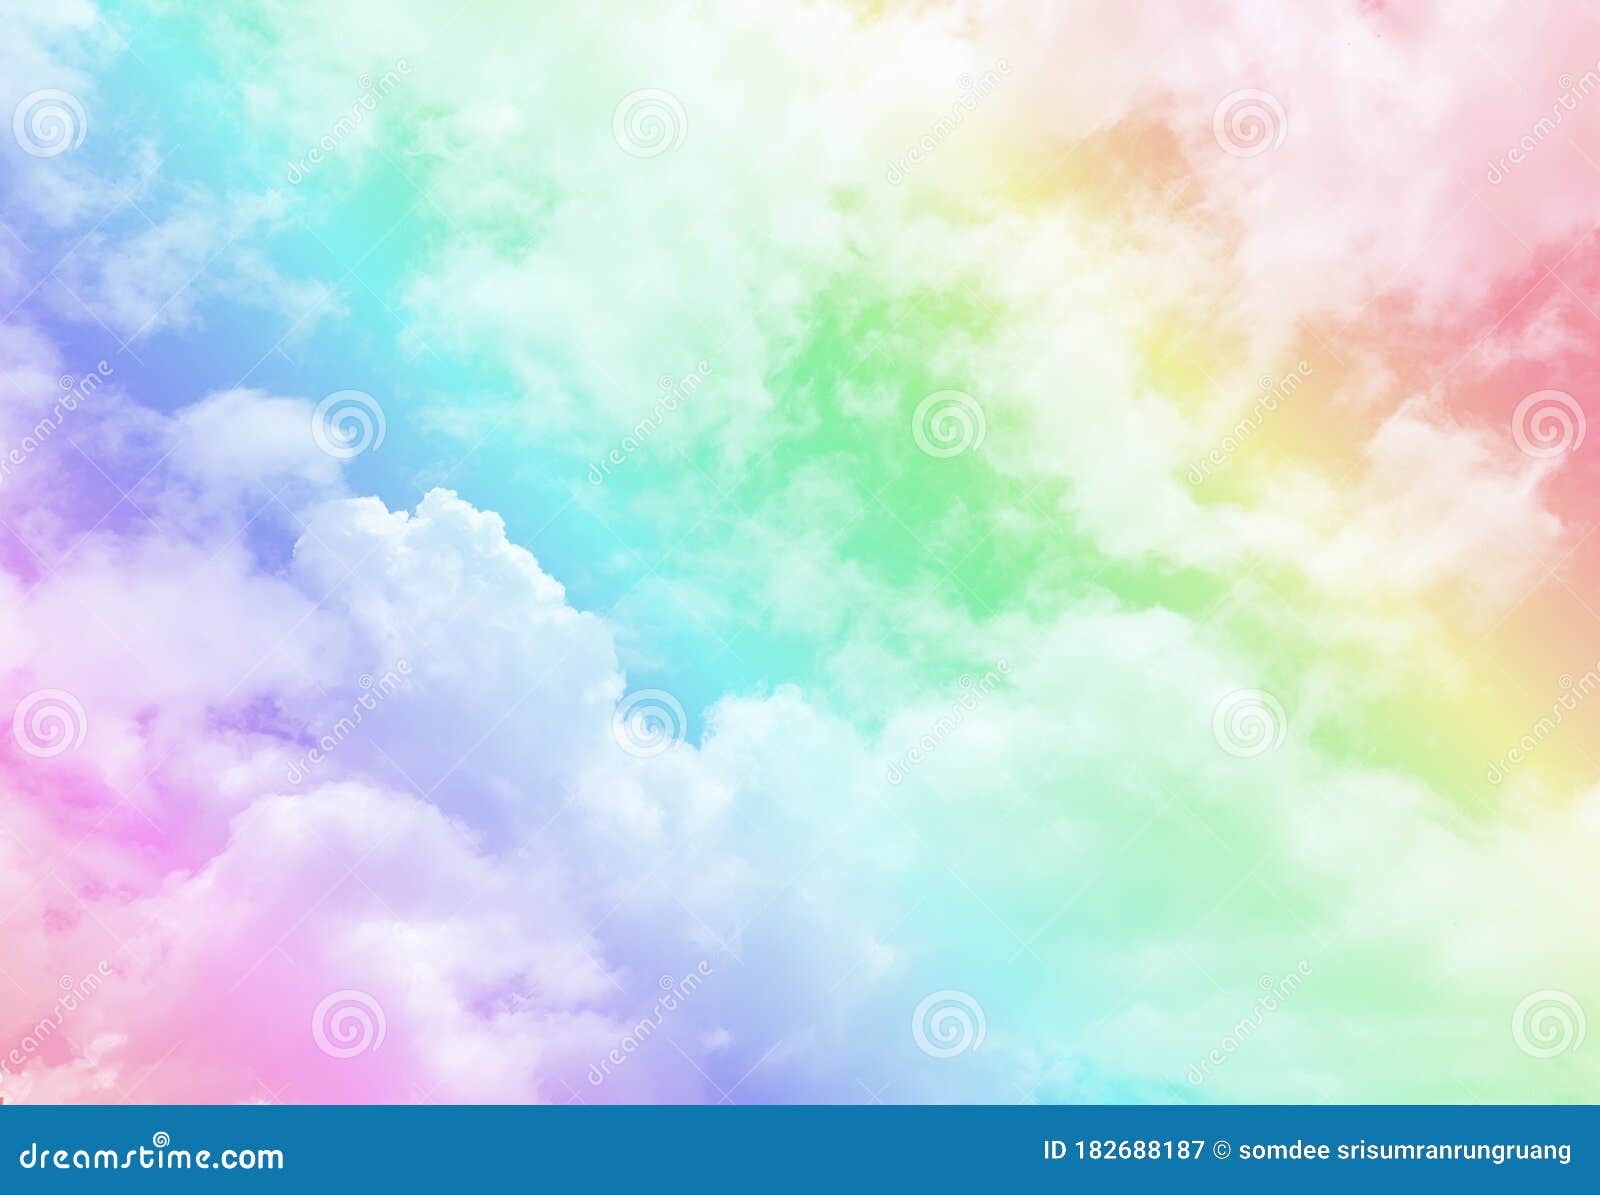 Abstract Cloud And Sky With A Pastel Rainbow Colored Background Stock Image Image Of Nature Cloudscape 182688187 A collection of the top 50 pastel colors wallpapers and backgrounds available for download for free. dreamstime com